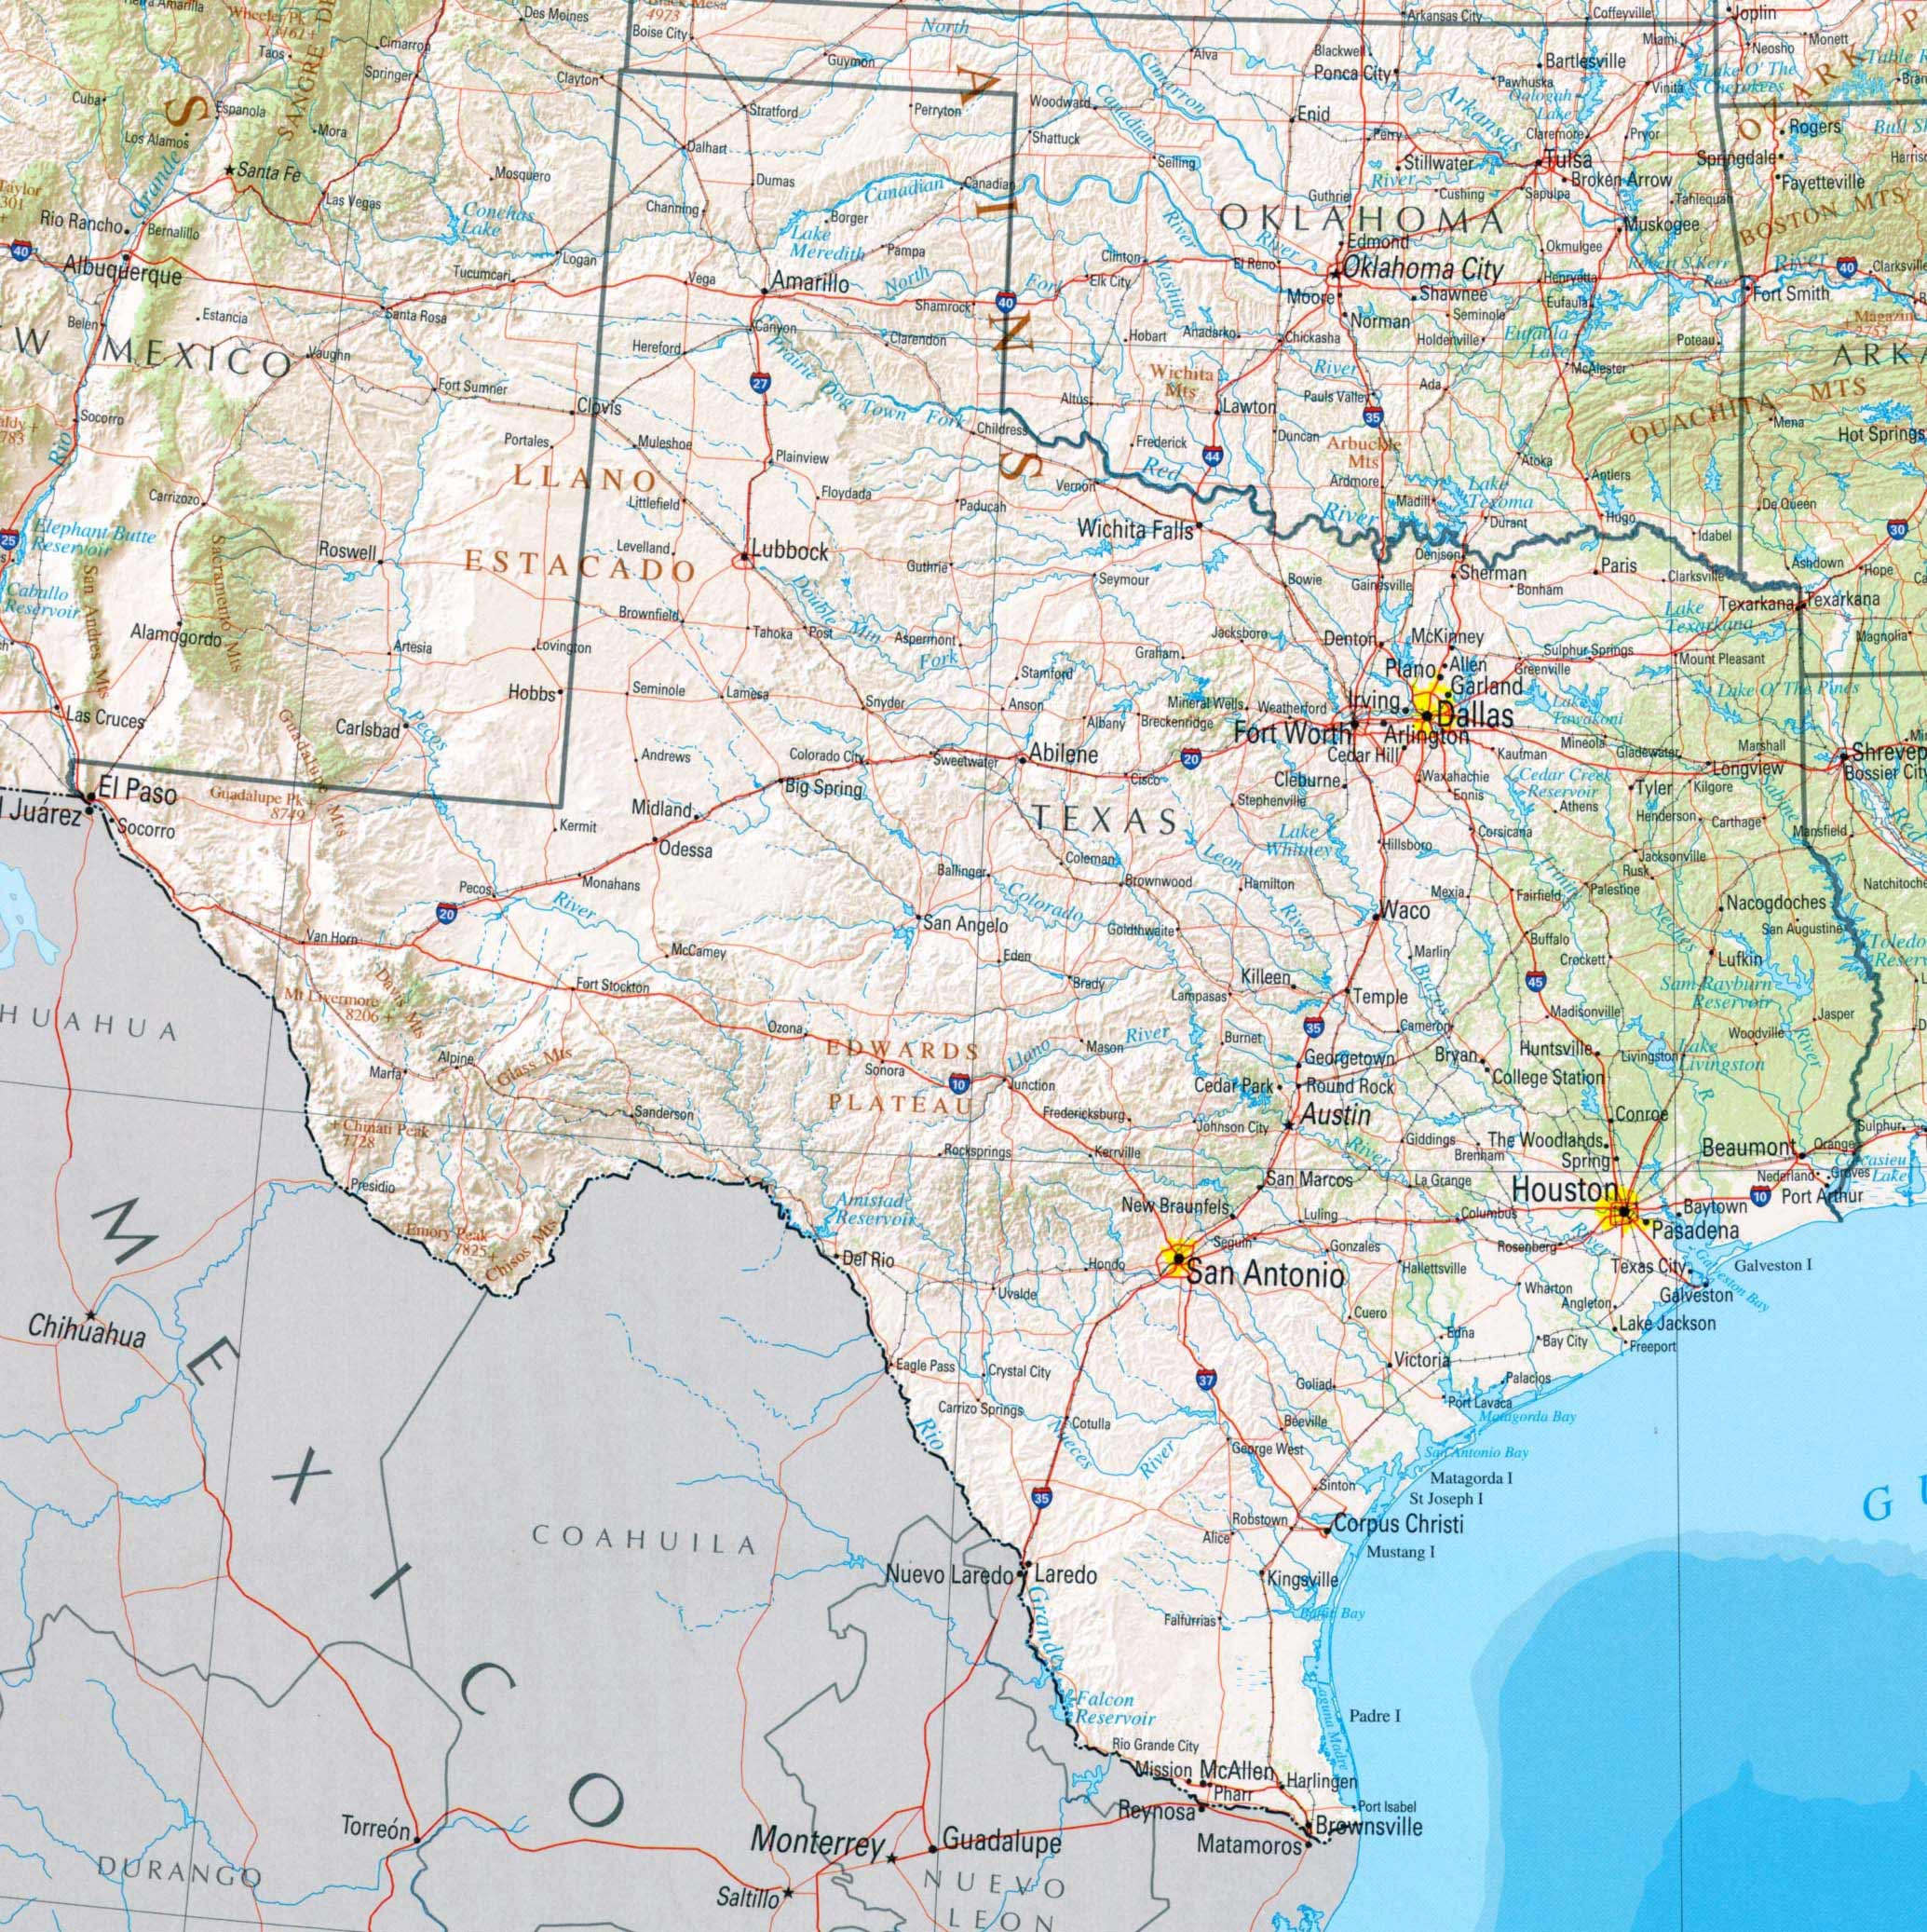 Texas Google Maps And Travel Information | Download Free Texas - Google Maps Beaumont Texas